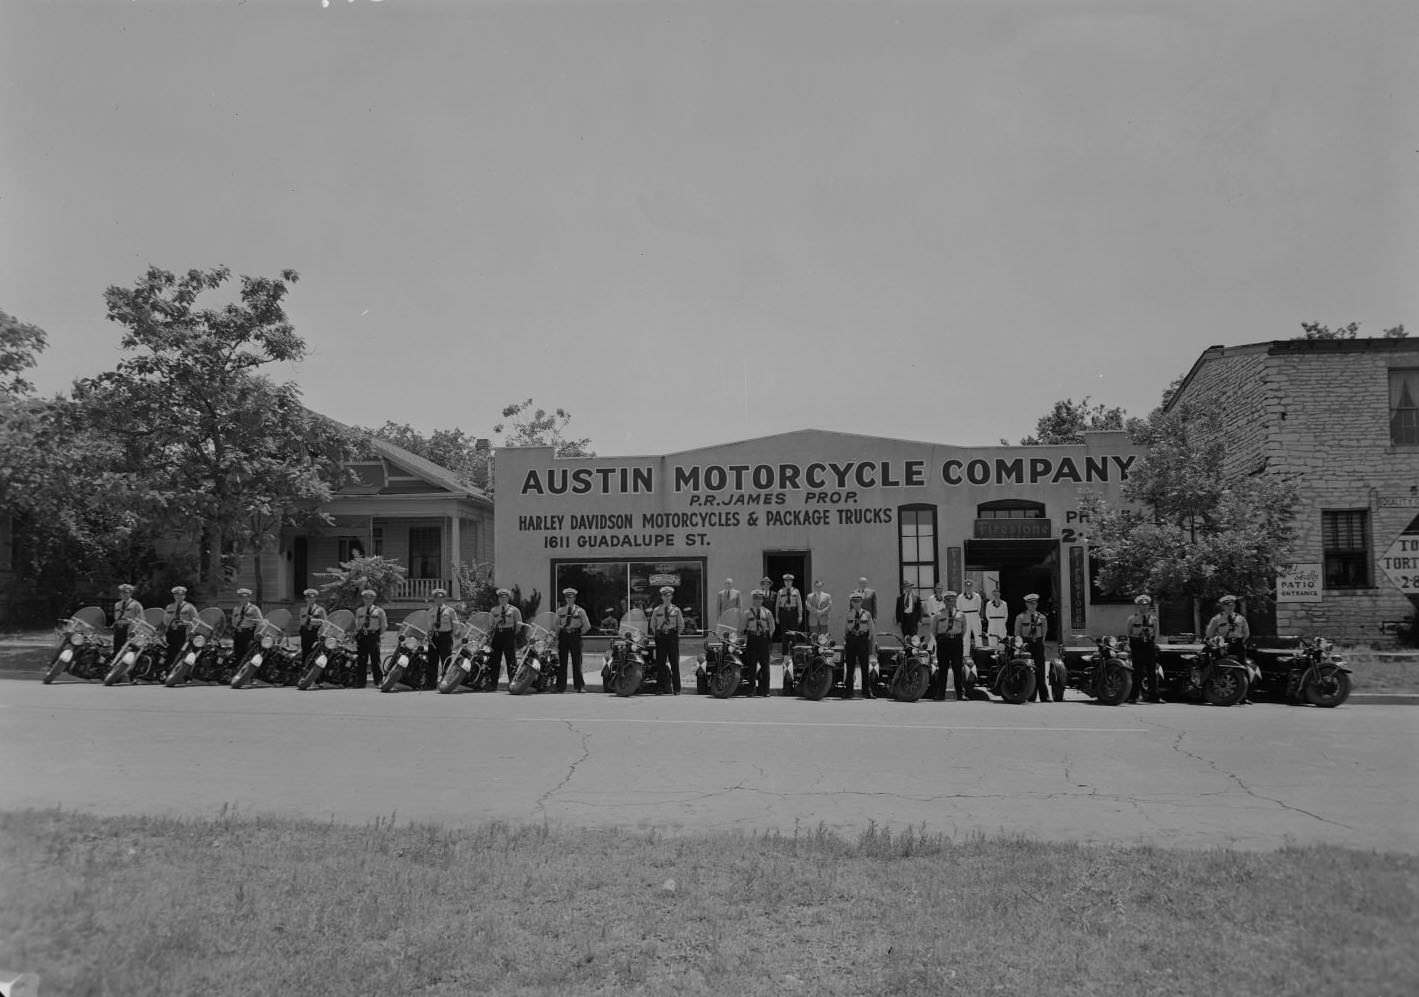 Austin Motorcycle Company with Police Men, 1953